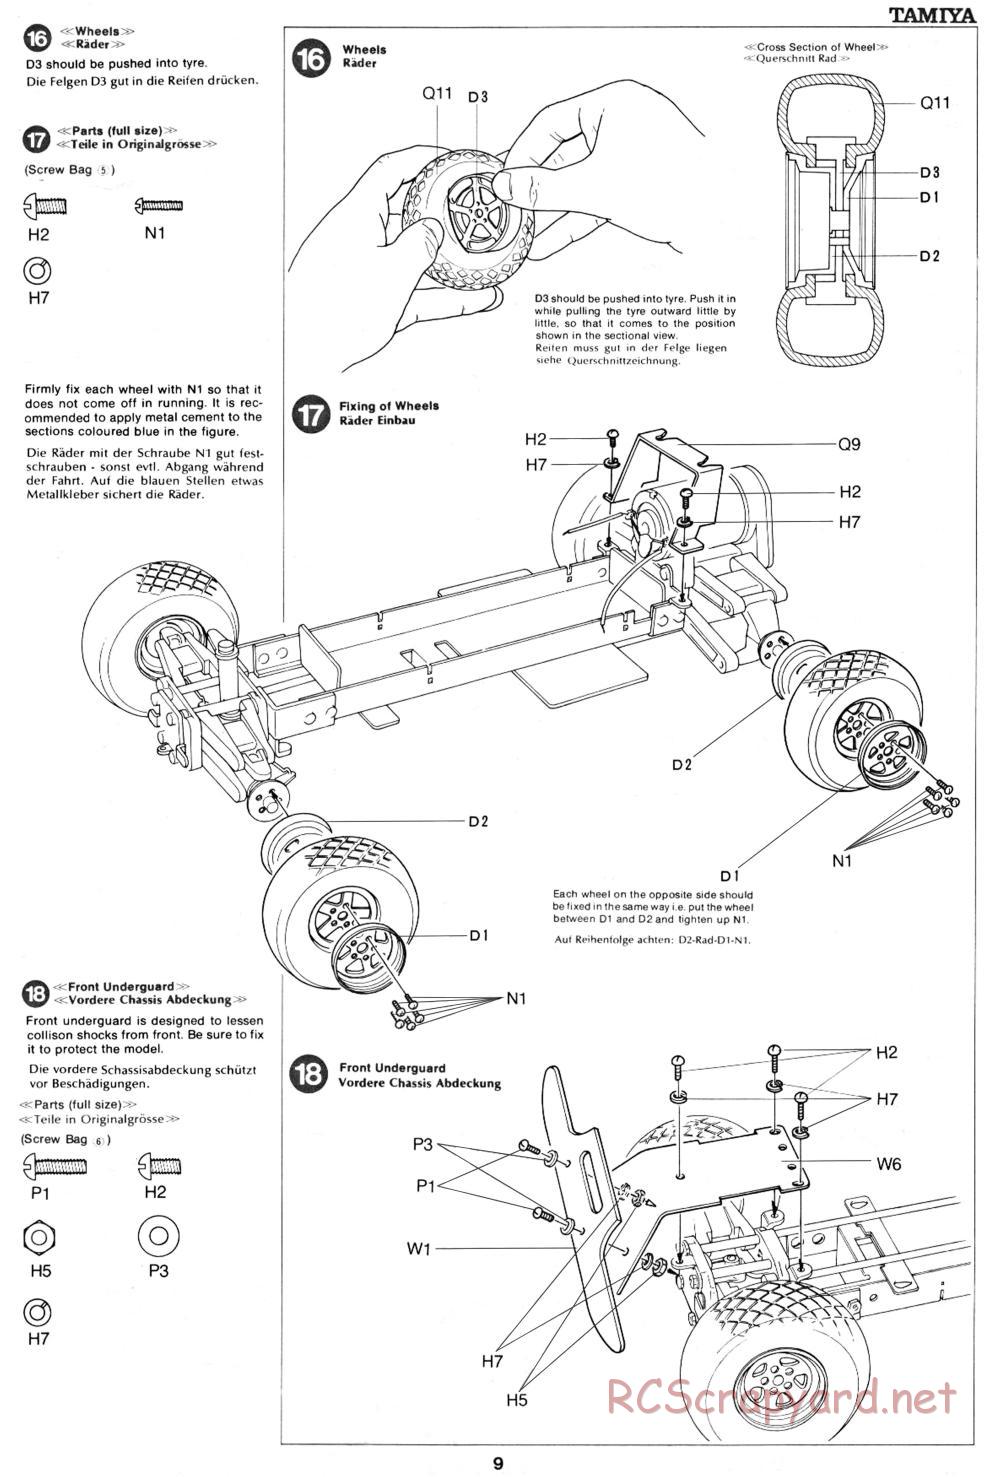 Tamiya - XR311 Combat Support Vehicle (1977) Chassis - Manual - Page 9